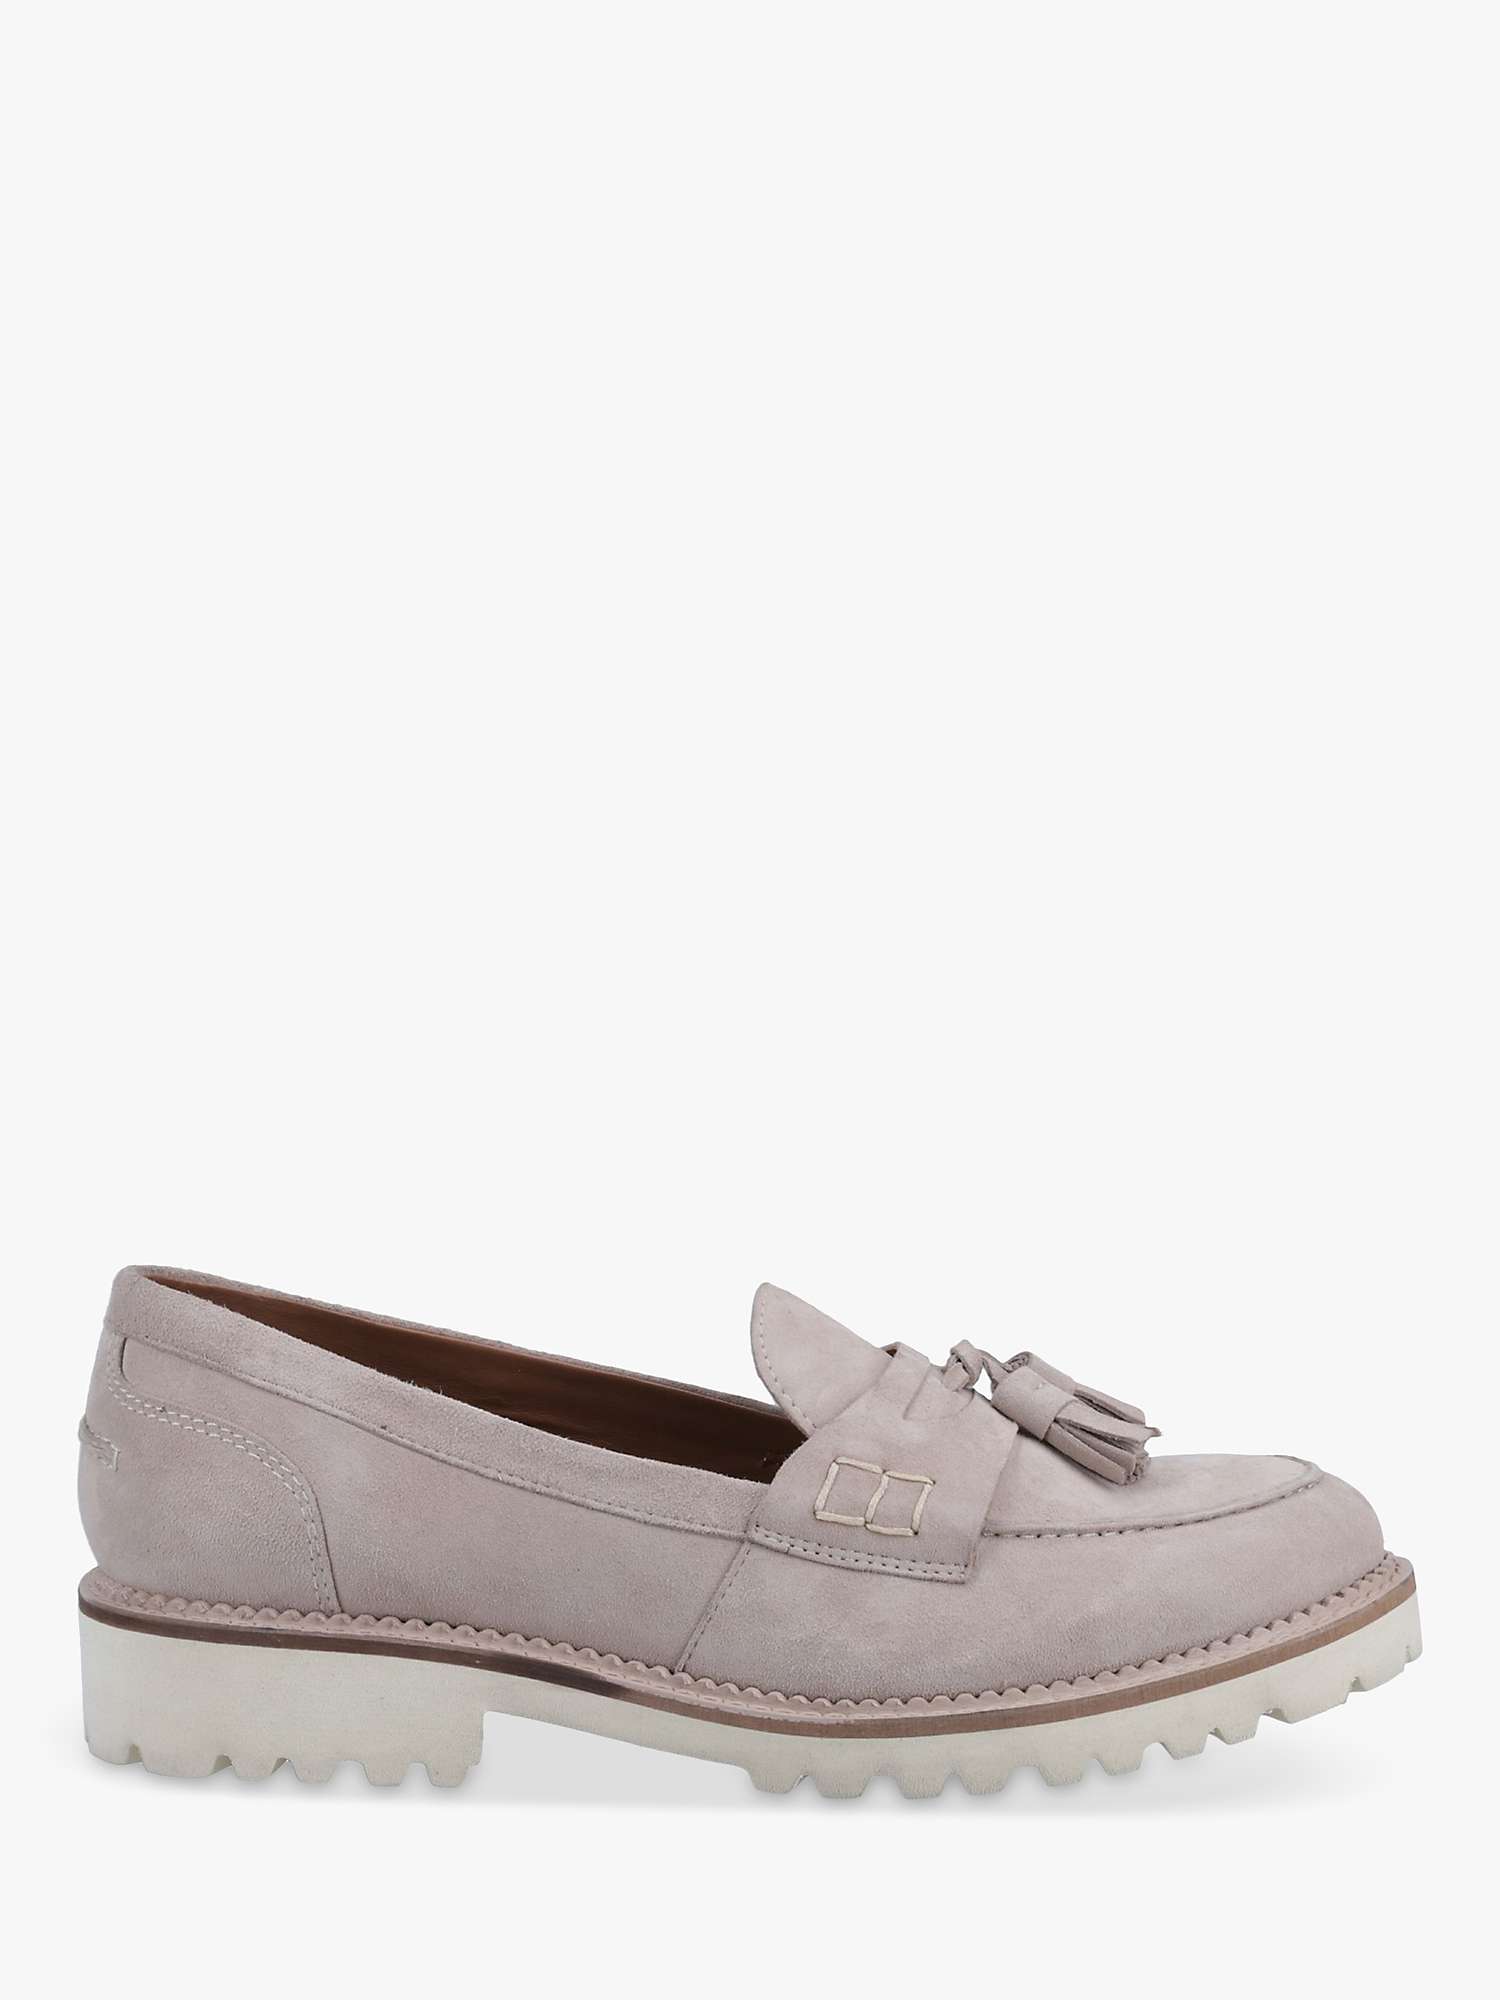 Buy Hush Puppies Ginny Block Heel Suede Loafers, Taupe Online at johnlewis.com